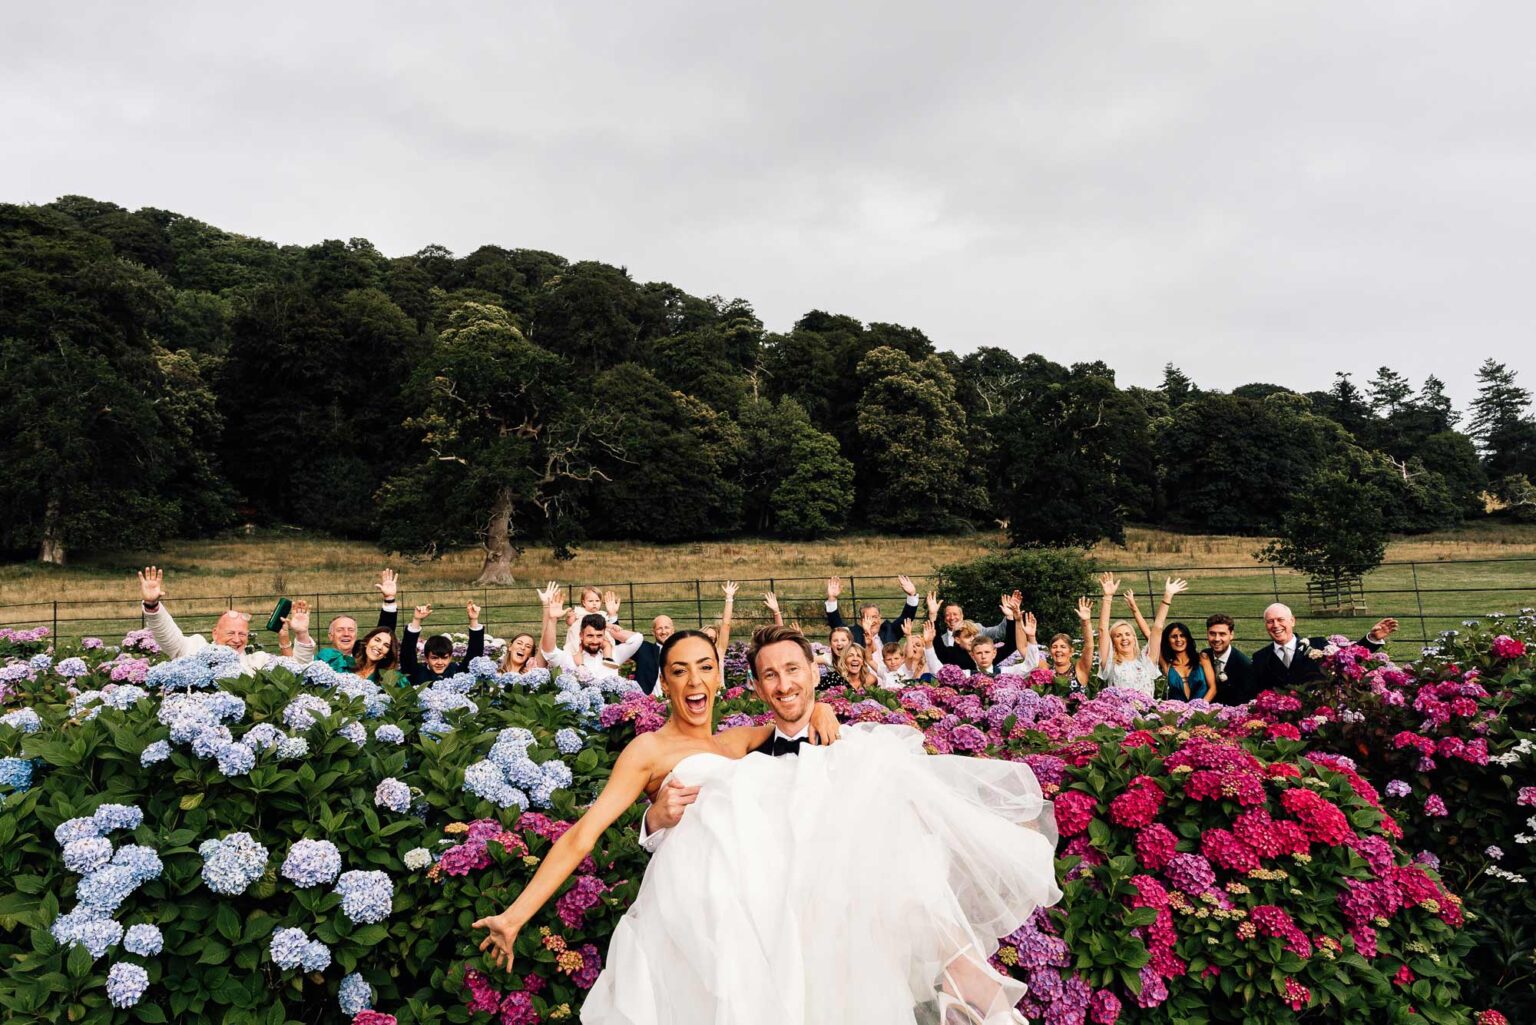 groom carrying bride in front of flower bed while his bridal party jump in the air at their wedding- Crowcombe court wedding Paul aston Photography Somerset wedding photographer